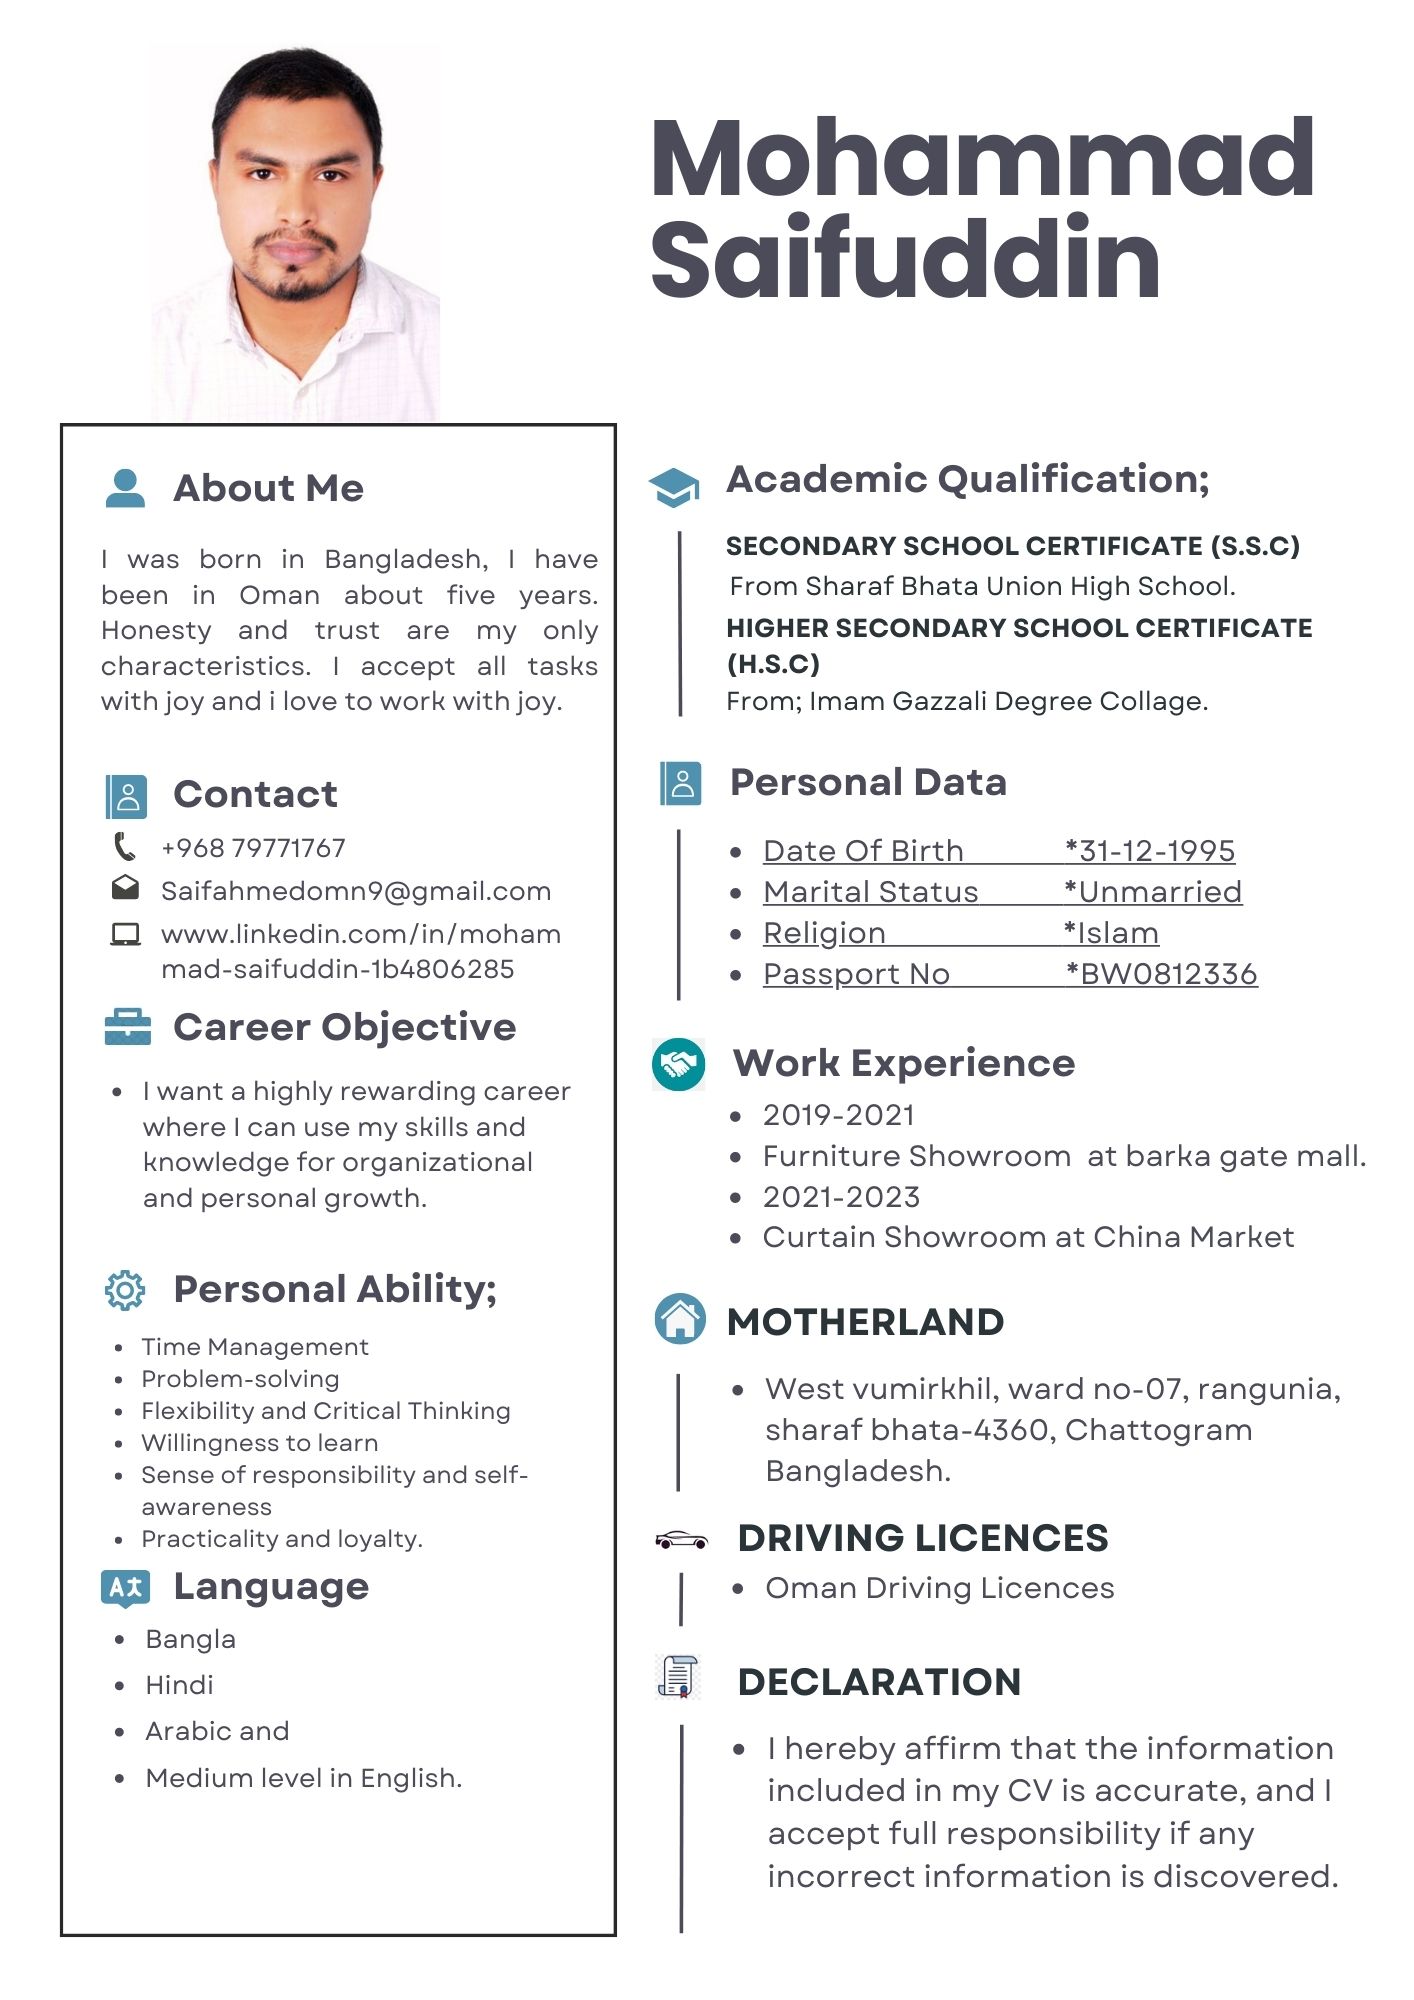 2 About Me

| was born in Bangladesh, | have
been in Oman about five years.
Honesty and trust are my only
characteristics. | accept all tasks
with joy and i love to work with joy.

|B} contact
+968 79771767
Saifahmedomn9@gmail.com

www linkedin.com/in/moham
mad-saifuddin-1b4806285

== Career Objective

* | want a highly rewarding career
where | can use my skills and
knowledge for organizational
and personal growth.

{ct Personal Ability;

Time Management
Problem-solving

Flexibility and Critical Thinking
Willingness to learn

Sense of responsibility and self-
awareness

Practicality and loyalty.

Language
Bangla
Hindi
Arabic and

Medium level in English.

 

Mohammad
Saifuddin

@® Academic Qualification;

SECONDARY SCHOOL CERTIFICATE (S.S.C)
From Sharaf Bhata Union High School.

HIGHER SECONDARY SCHOOL CERTIFICATE
(H.s.C)
From; Imam Gazzali Degree Collage.

IB Personal Data

e Date Of Birth *31-12-1995
e Marital Status *Unmarried
* Religion *Islam

e Passport No *BWO0812336

S Work Experience
eo 2019-2021
e Furniture Showroom at barka gate mall.
e 2021-2023
e Curtain Showroom at China Market

(©) MOTHERLAND

eo West vumirkhil, ward no-07, rangunia,
sharaf bhata-4360, Chattogram
Bangladesh.

«= DRIVING LICENCES

¢ Oman Driving Licences

J DECLARATION

e | hereby affirm that the information
included in my CV is accurate, and |
accept full responsibility if any
incorrect information is discovered.